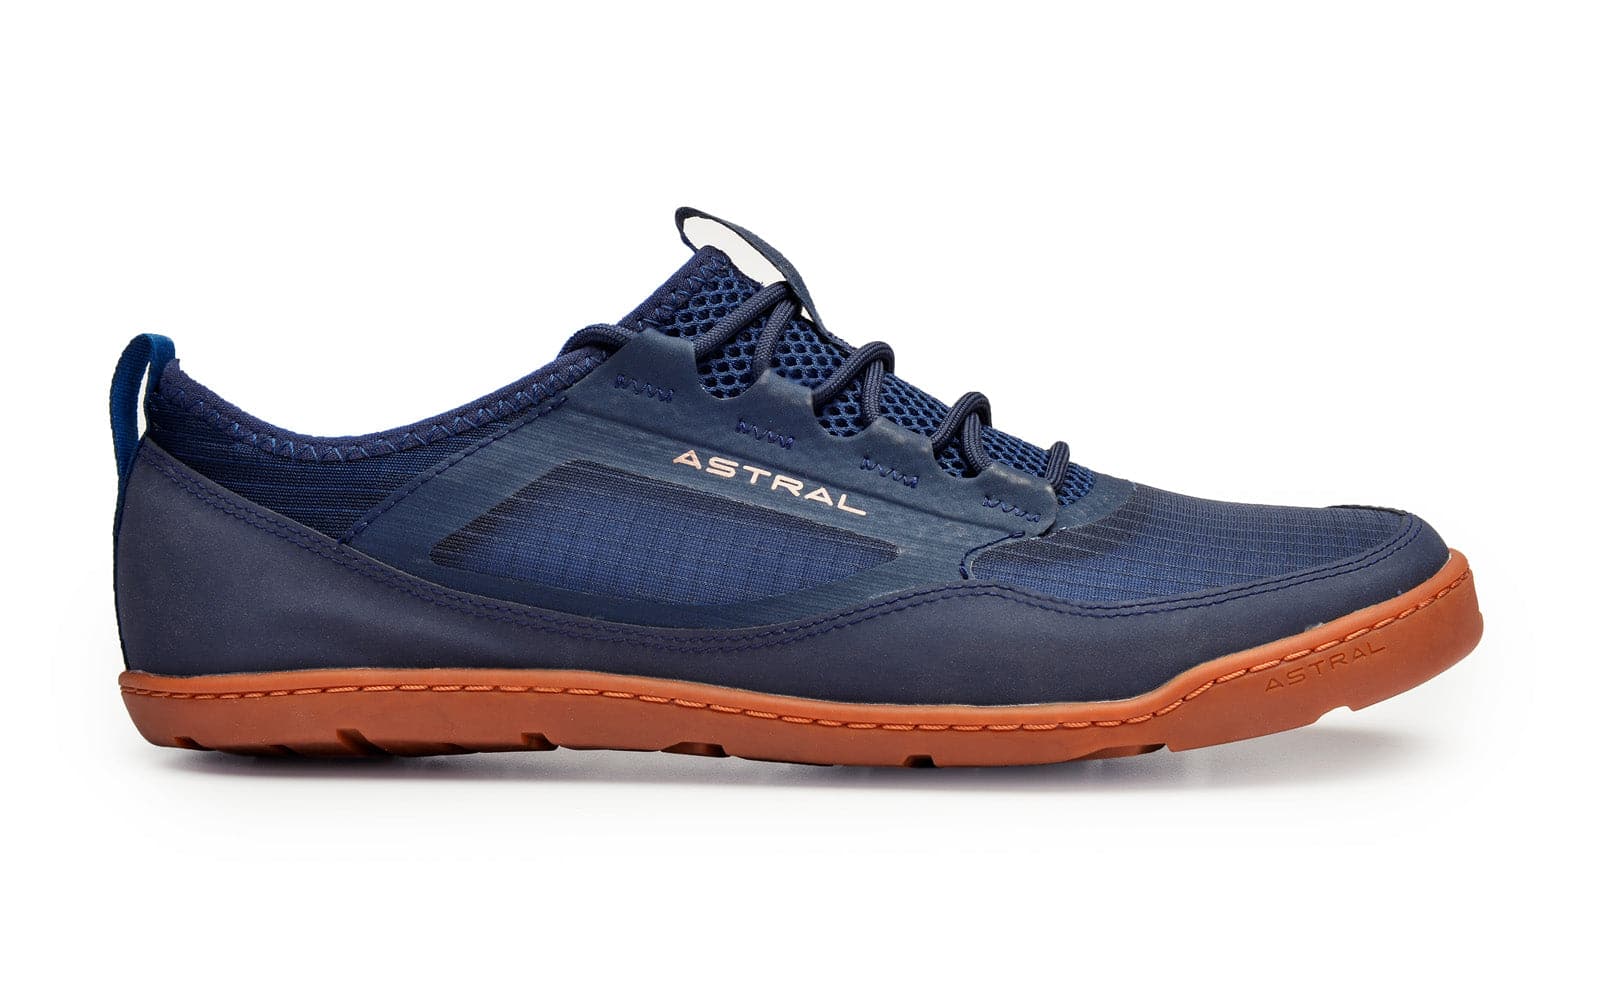 Featuring the Loyak AC - Men's men's footwear manufactured by Astral shown here from a seventh angle.